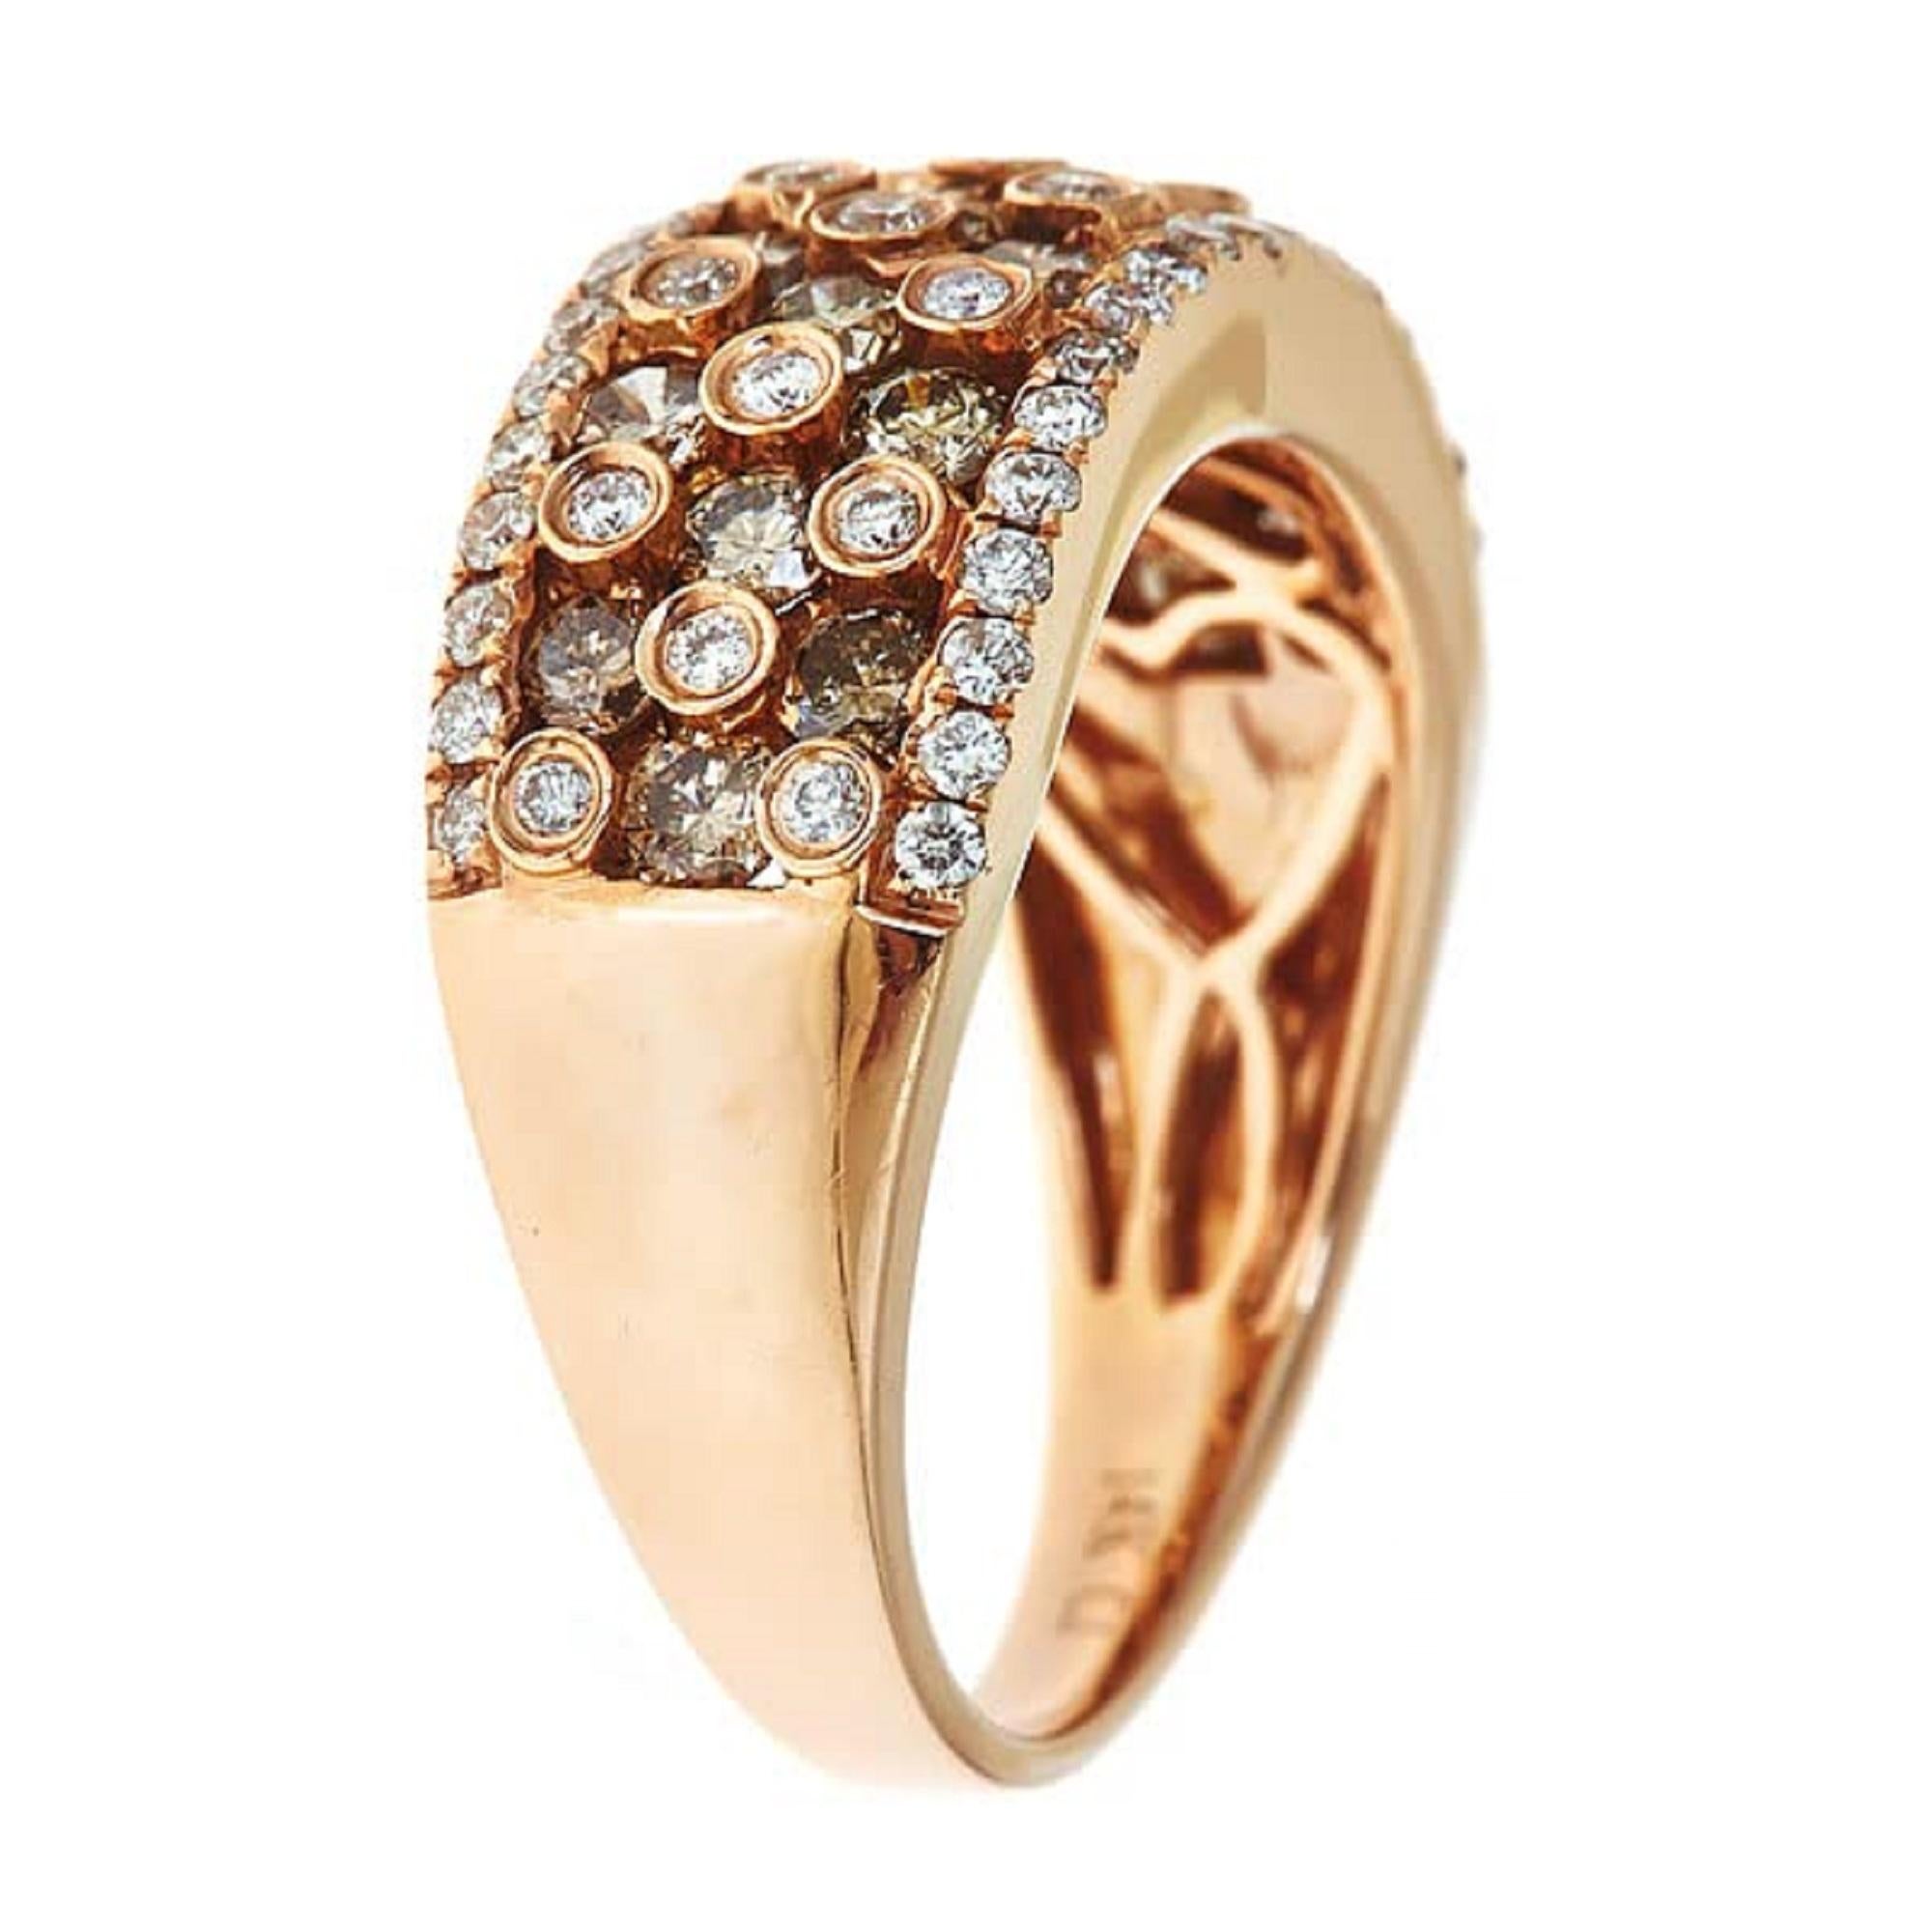 Decorate yourself in elegance with this Ring is crafted from 14-karat Rose Gold by Gin & Grace. This Ring is made up of Round-cut Brown Diamond (19 Pcs) 1.05 Carat. This Ring is weight 4.95 grams. This delicate Ring is polished to a high finish